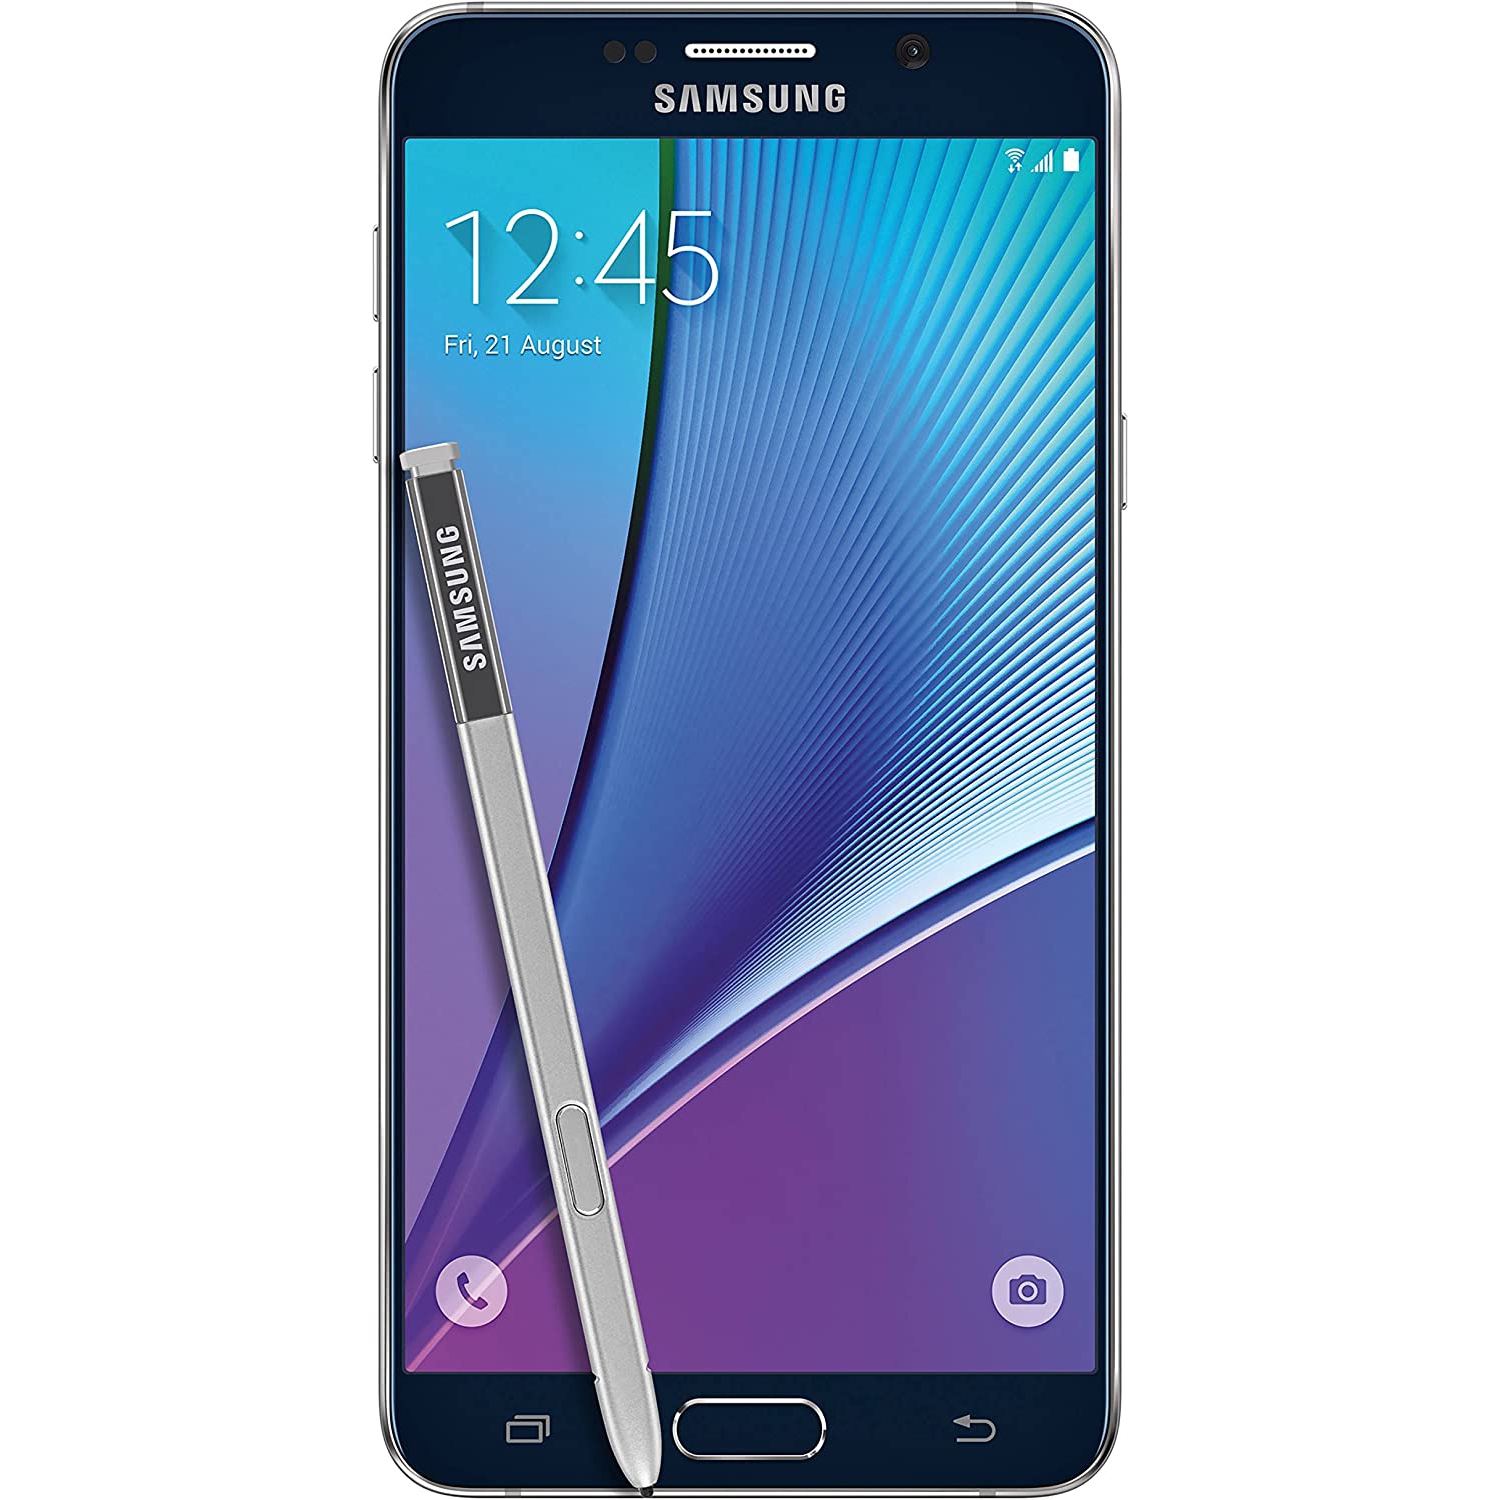 Samsung Galaxy Note 5 - 32GB Smartphone - Black Sapphire - Unlocked - Certified Pre-Owned (9/10)